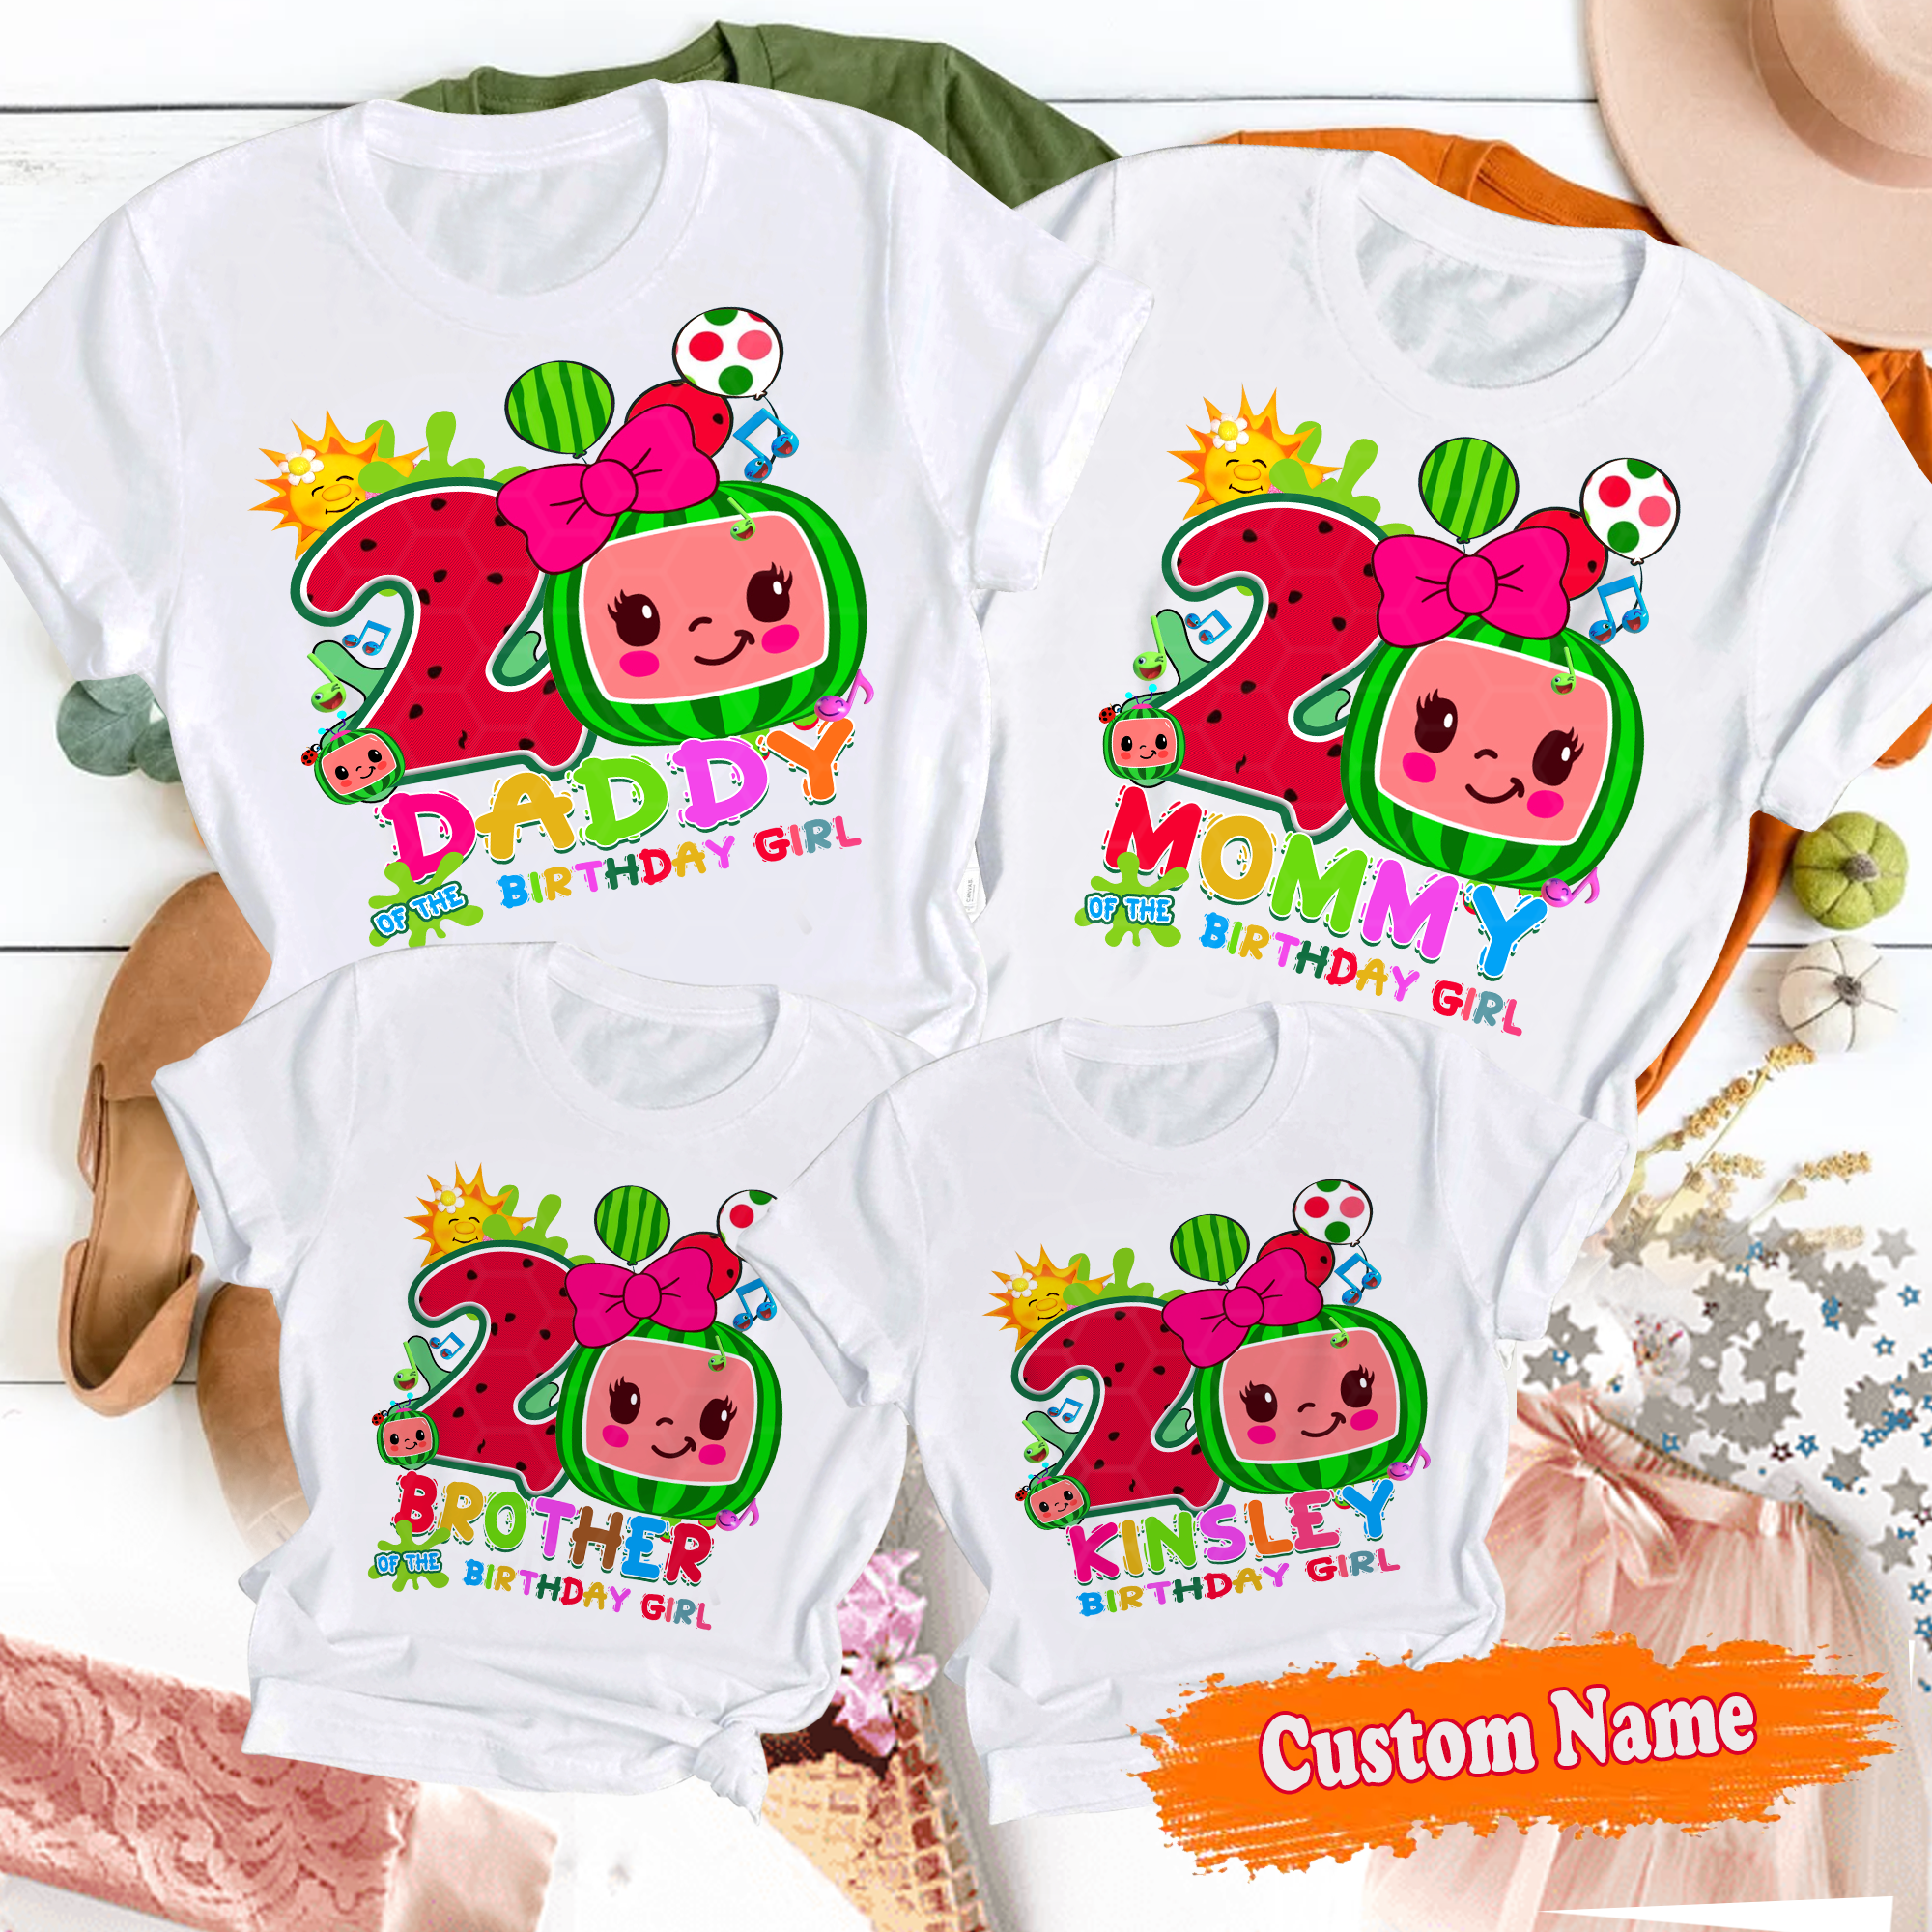 Cocomelon Girl Birthday Shirt, Cocomelon Matching Family Shirt, Rainbow Cocomelon Birthday Shirt Family For Kid's Party, Birthday Gifts